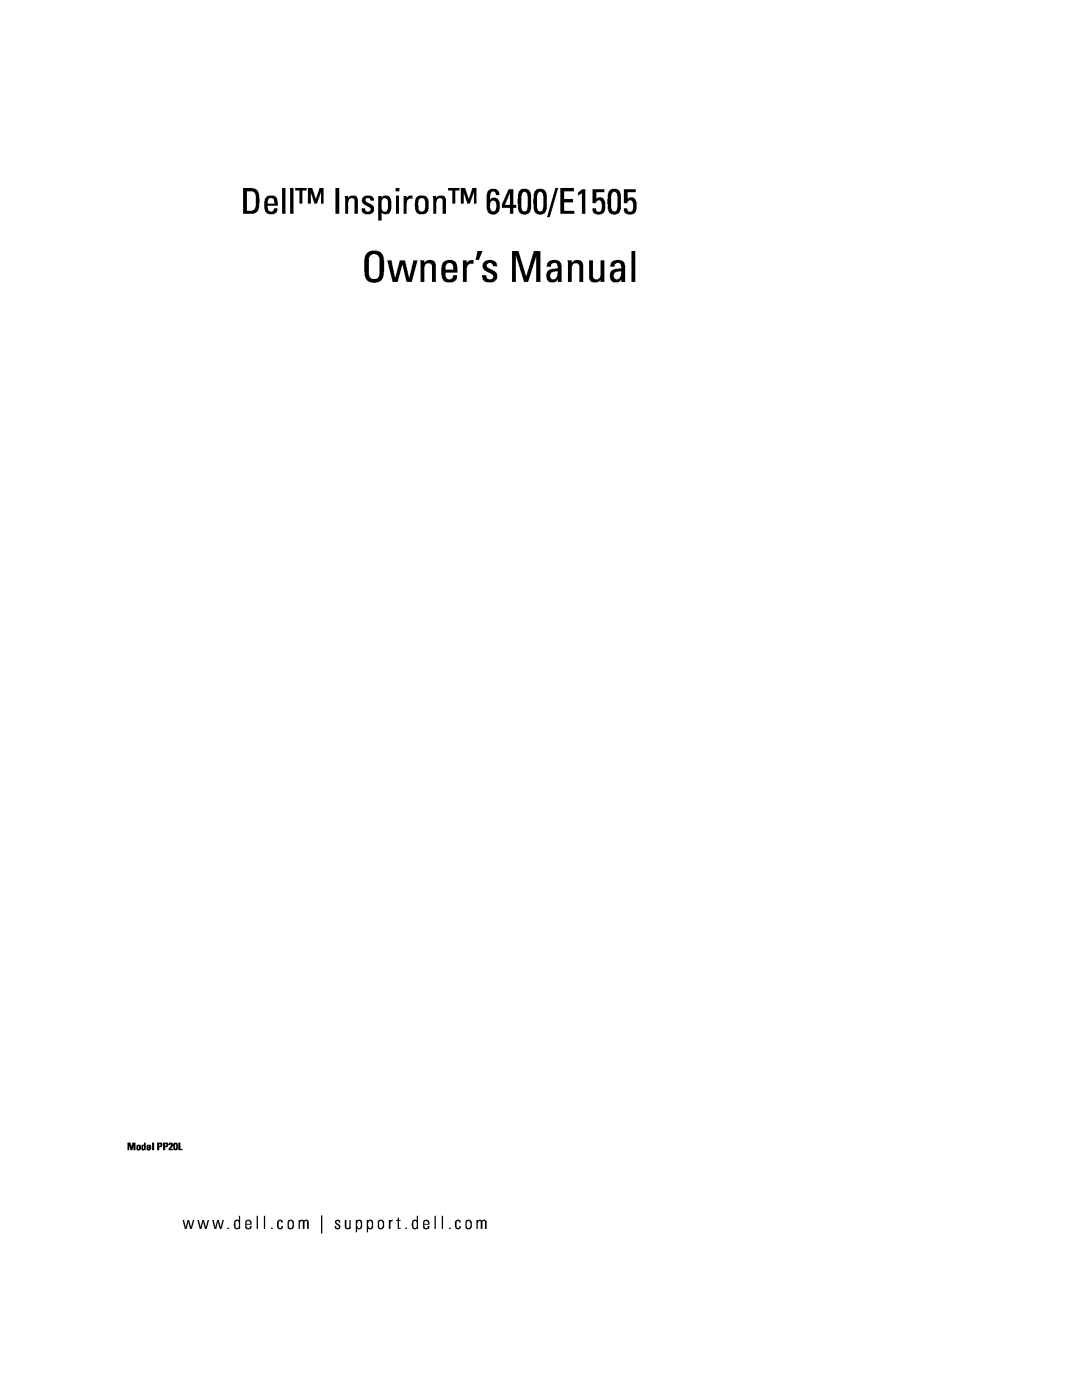 Dell owner manual Owner’s Manual, Dell Inspiron 6400/E1505, Model PP20L 